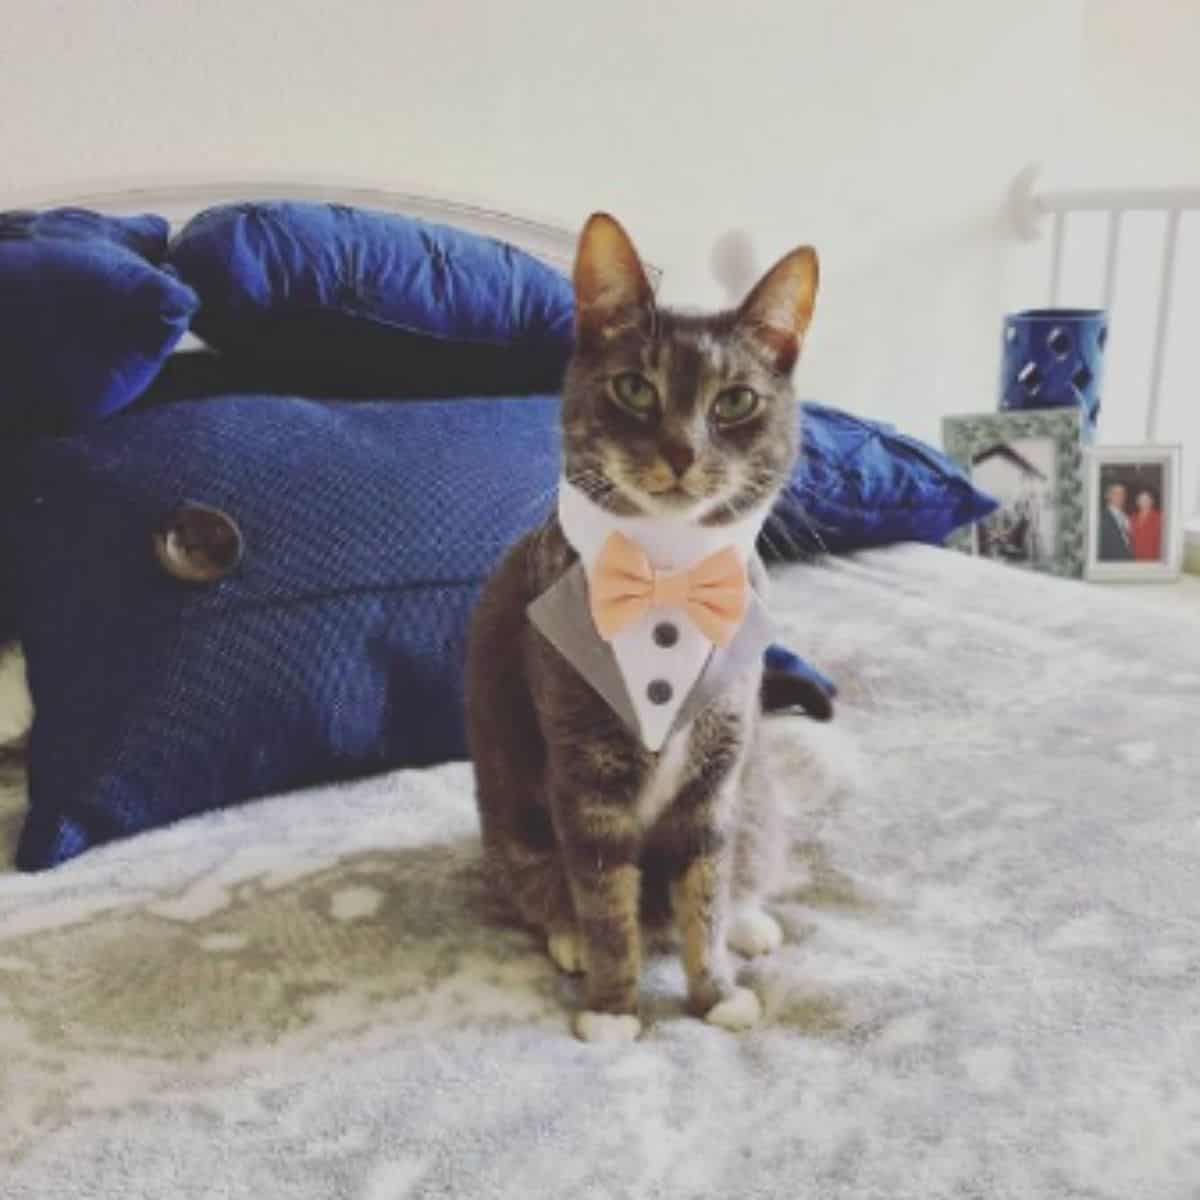 cat with a bow tie